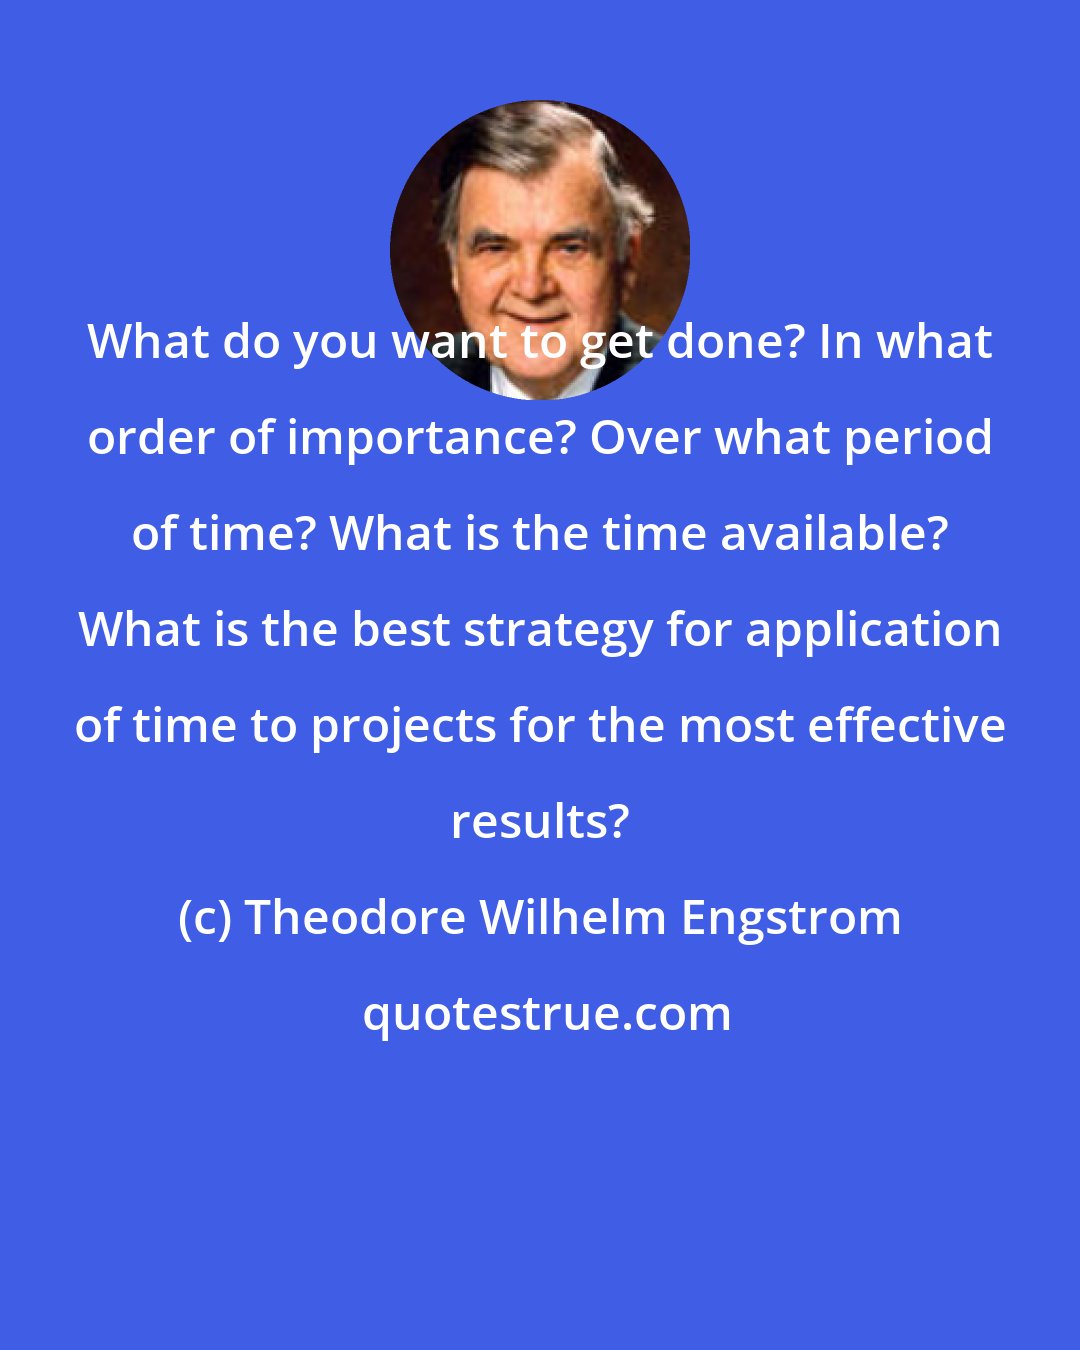 Theodore Wilhelm Engstrom: What do you want to get done? In what order of importance? Over what period of time? What is the time available? What is the best strategy for application of time to projects for the most effective results?